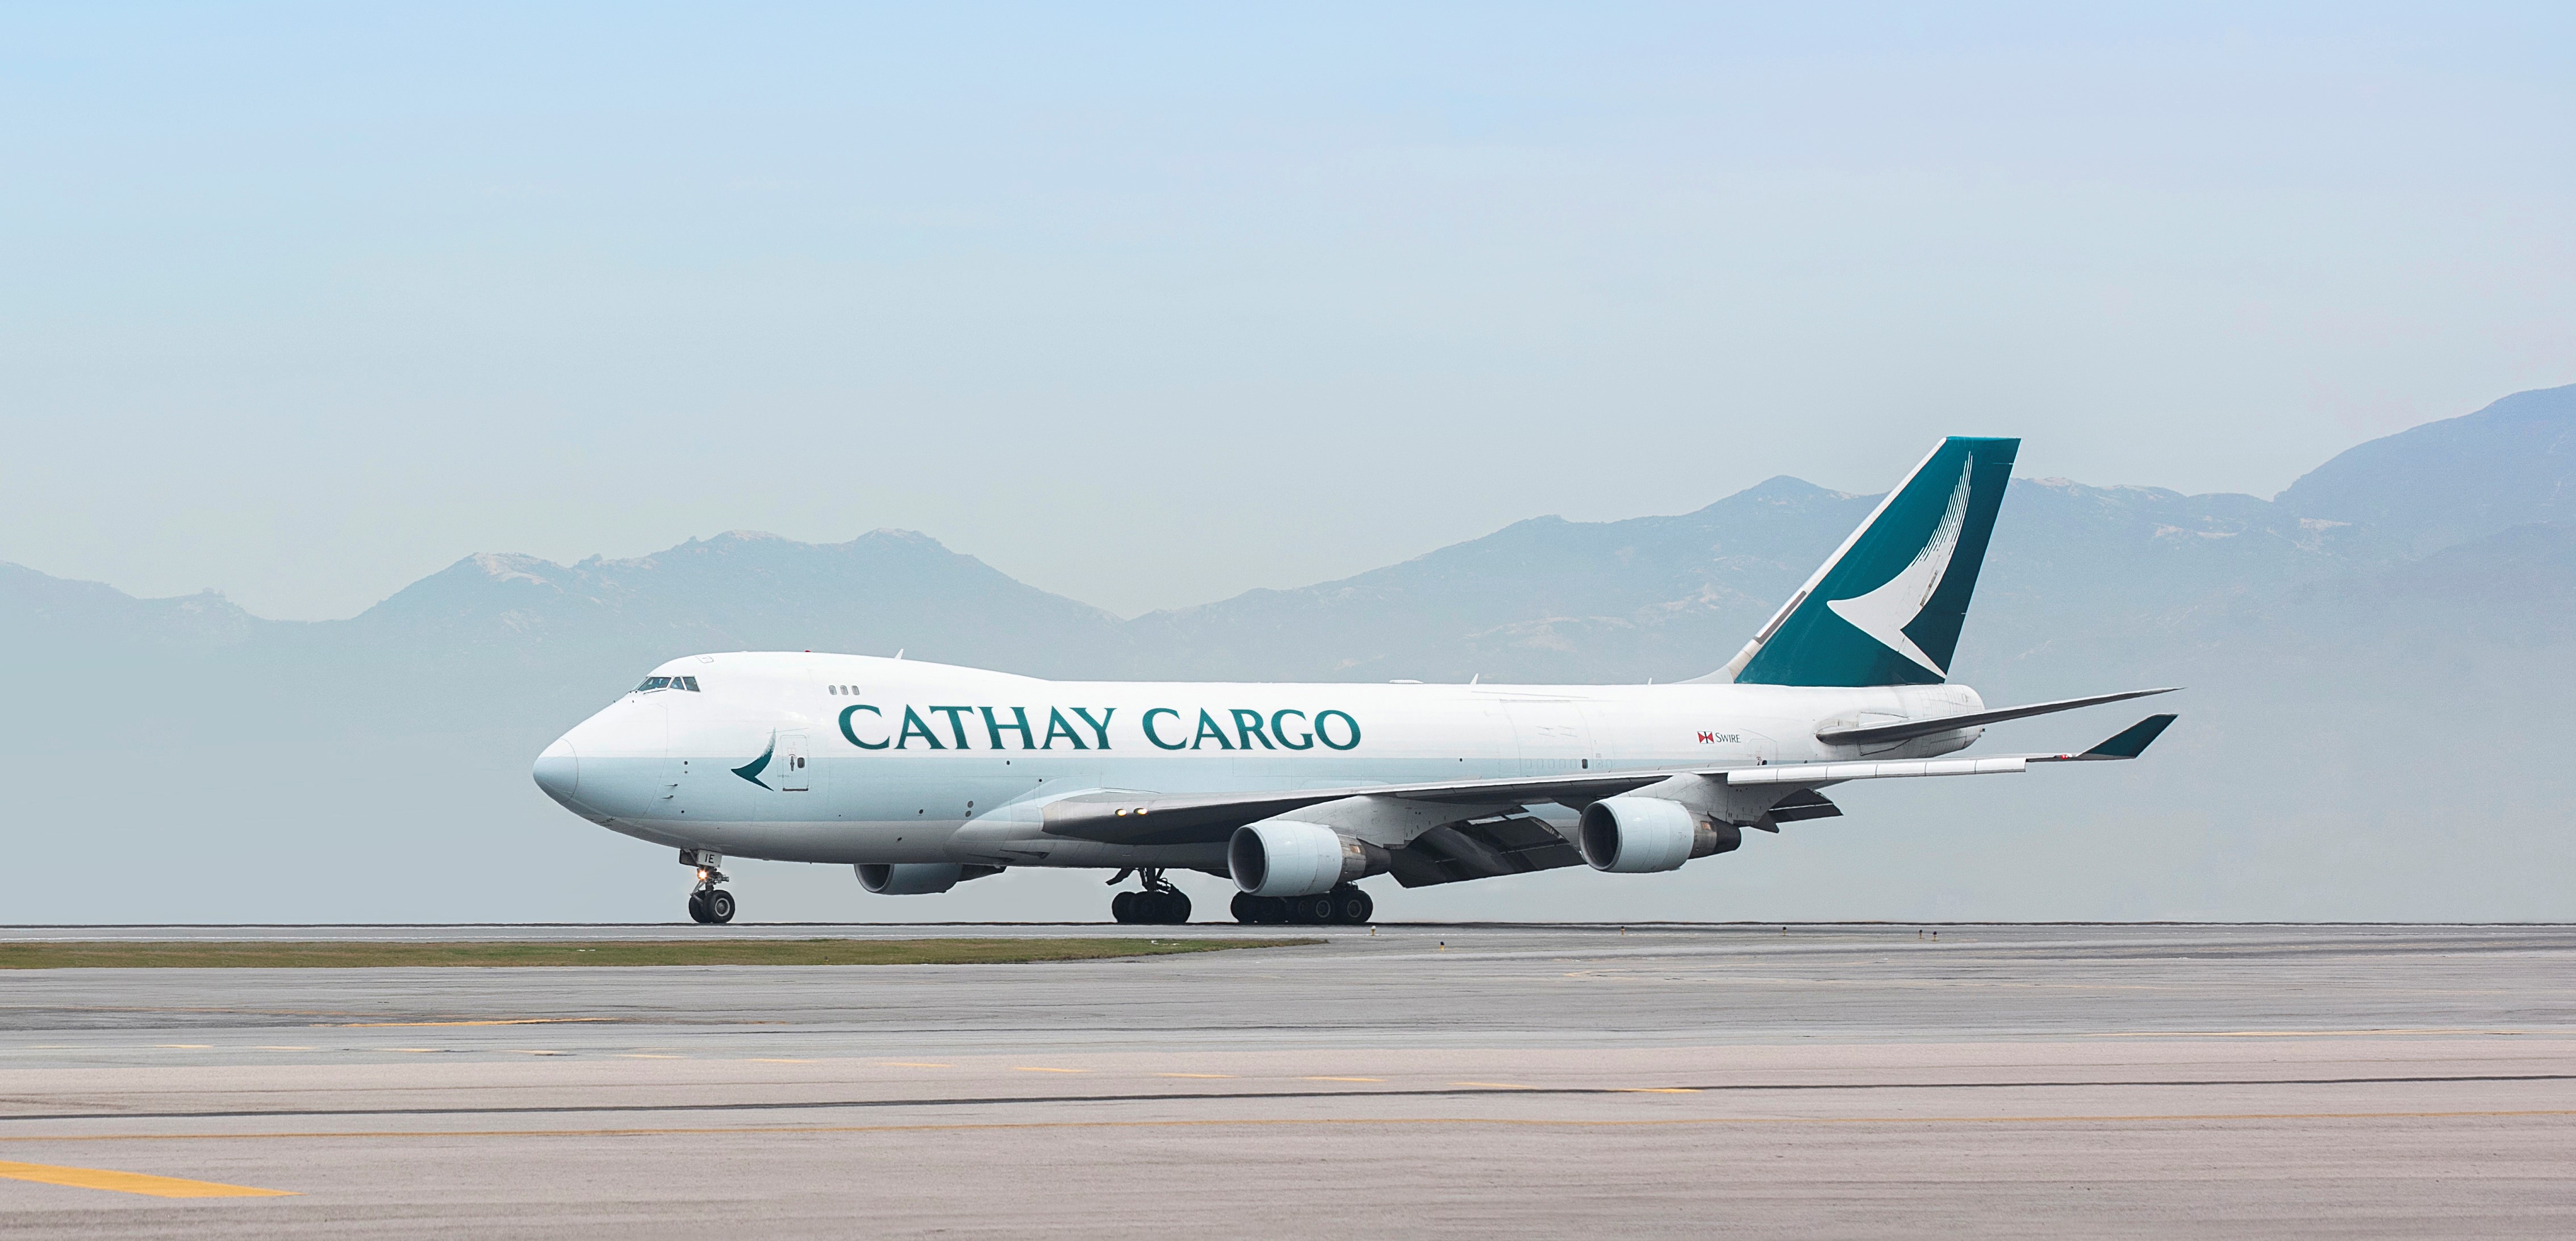 Cathay Cargo launches new brand campaign